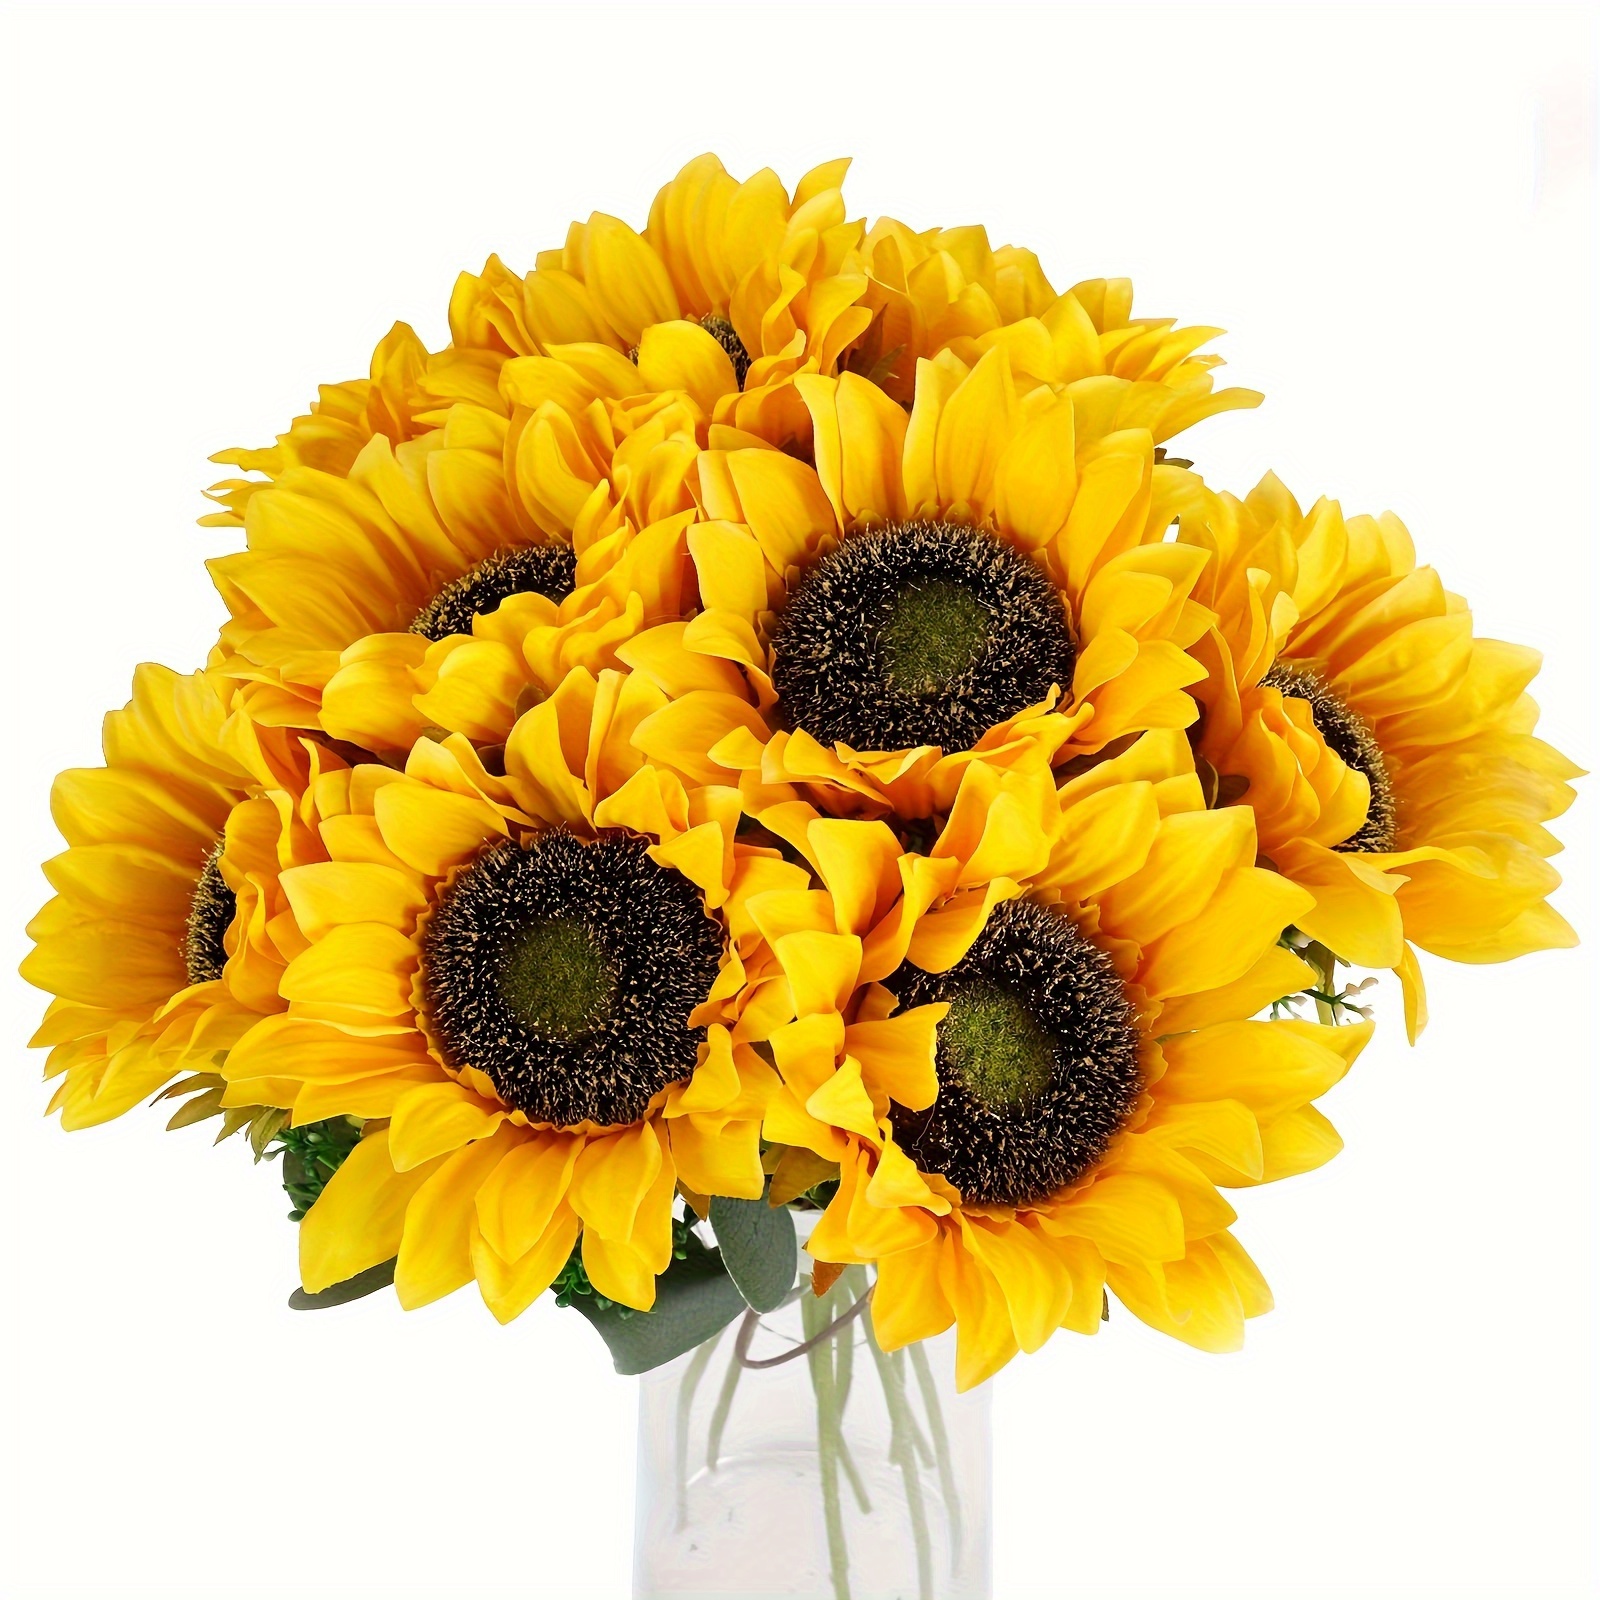 

10-pack Artificial Sunflowers With Stems - 17.7" Faux Sunflower Bouquet For Home Decor, Wedding, Birthday, Spring & Summer Events, St. Patrick's & Easter Celebrations